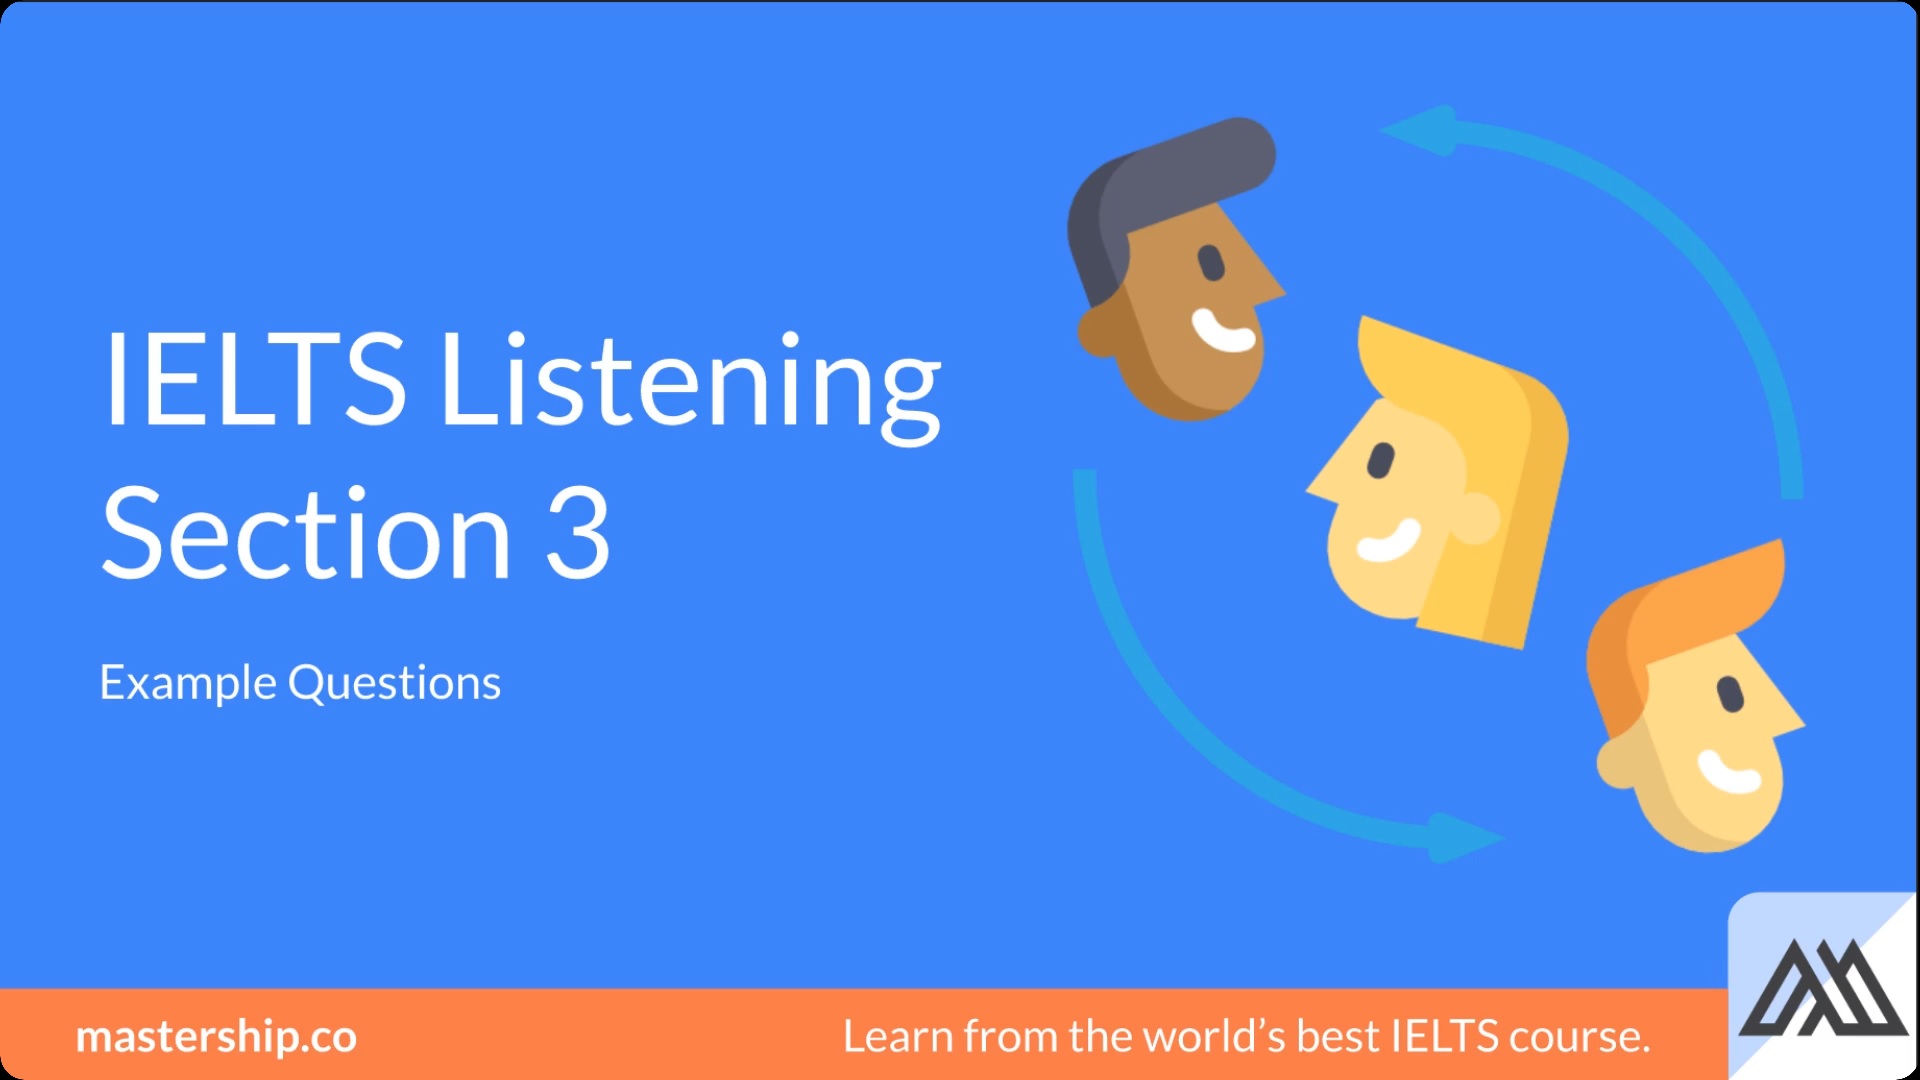 How to Answer Section 3 of IELTS listening test